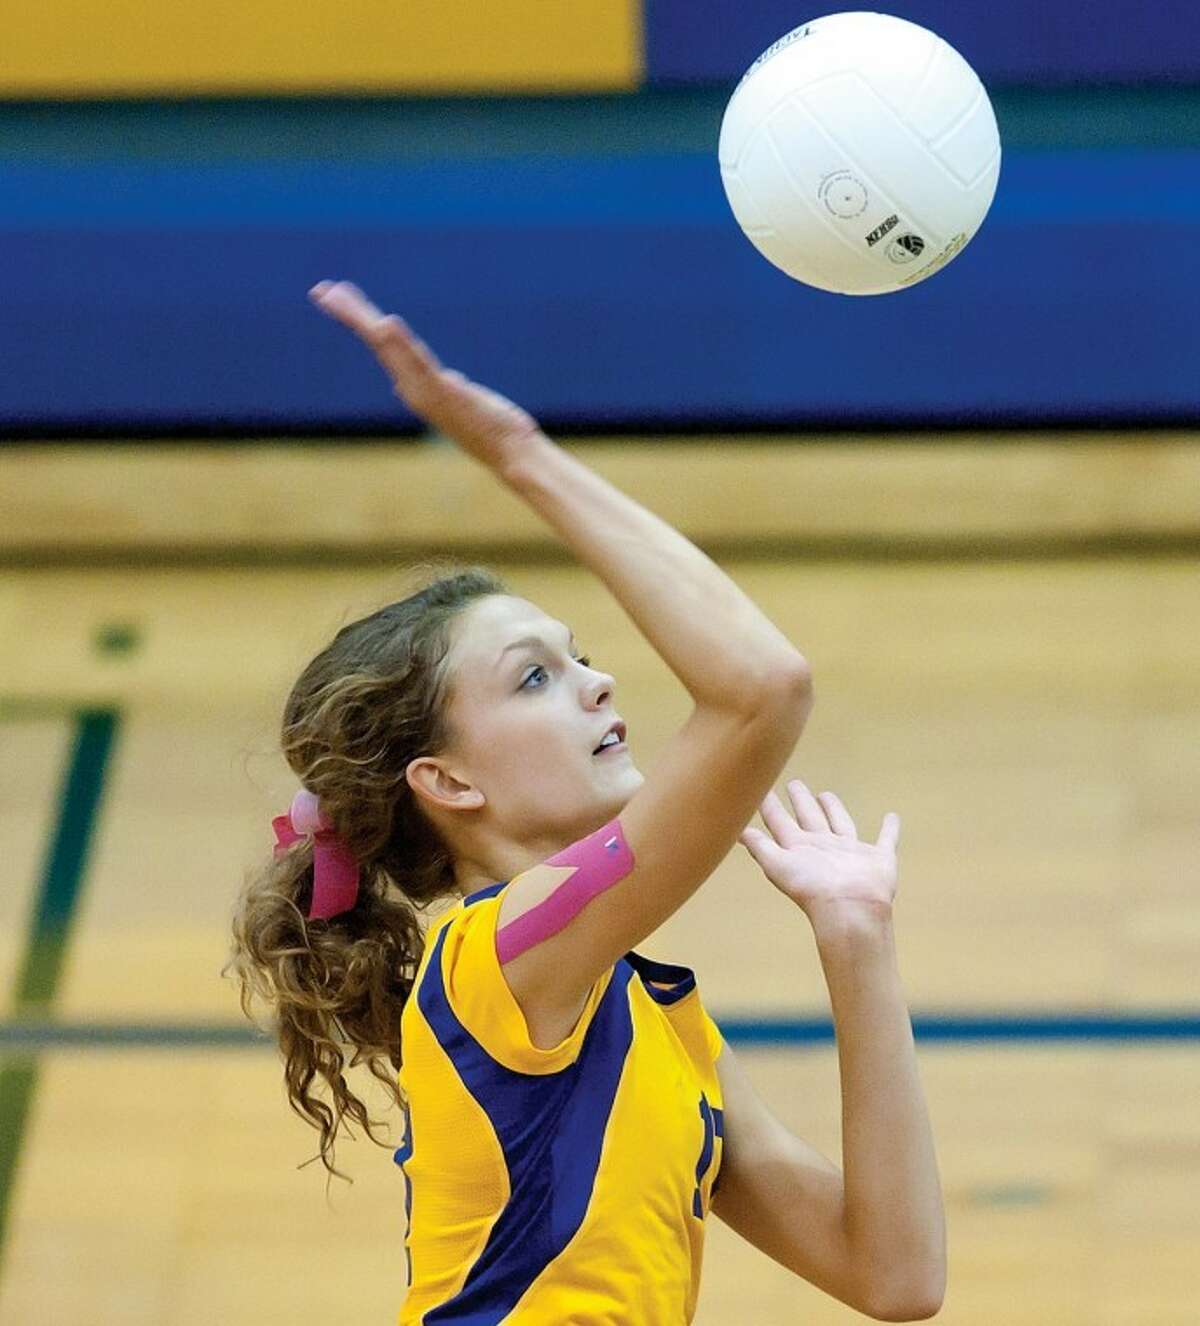 NICK KING | nking@mdn.netMidland's Tori Blake spikes the ball over the net during a recent Chemics volleyball match.